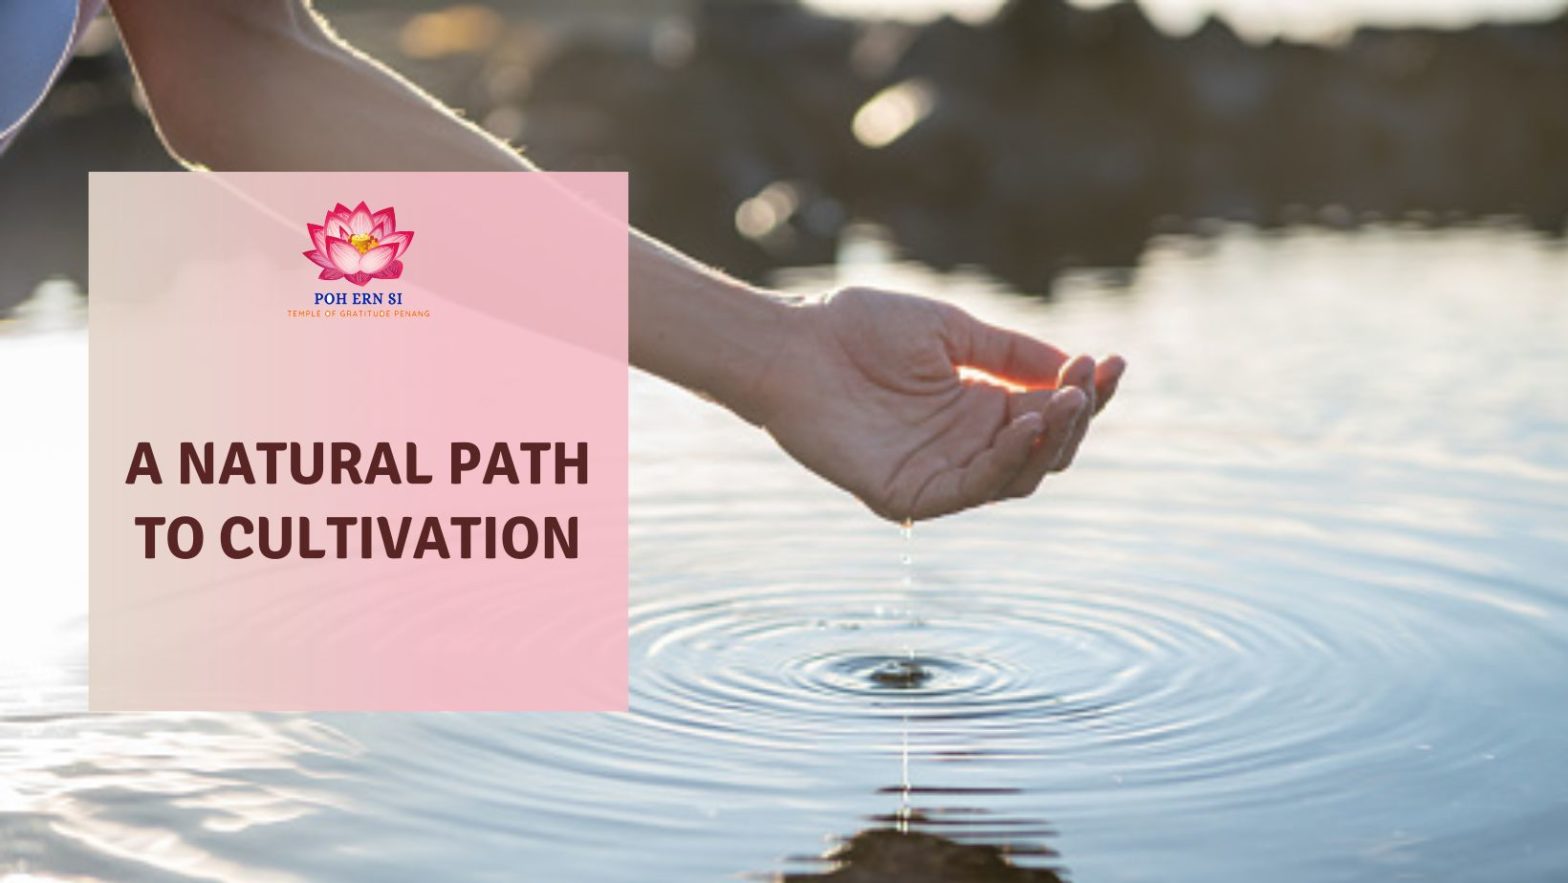 A Natural Path to Cultivation featured image - Poh Ern Si Penang Pohernsi's blog